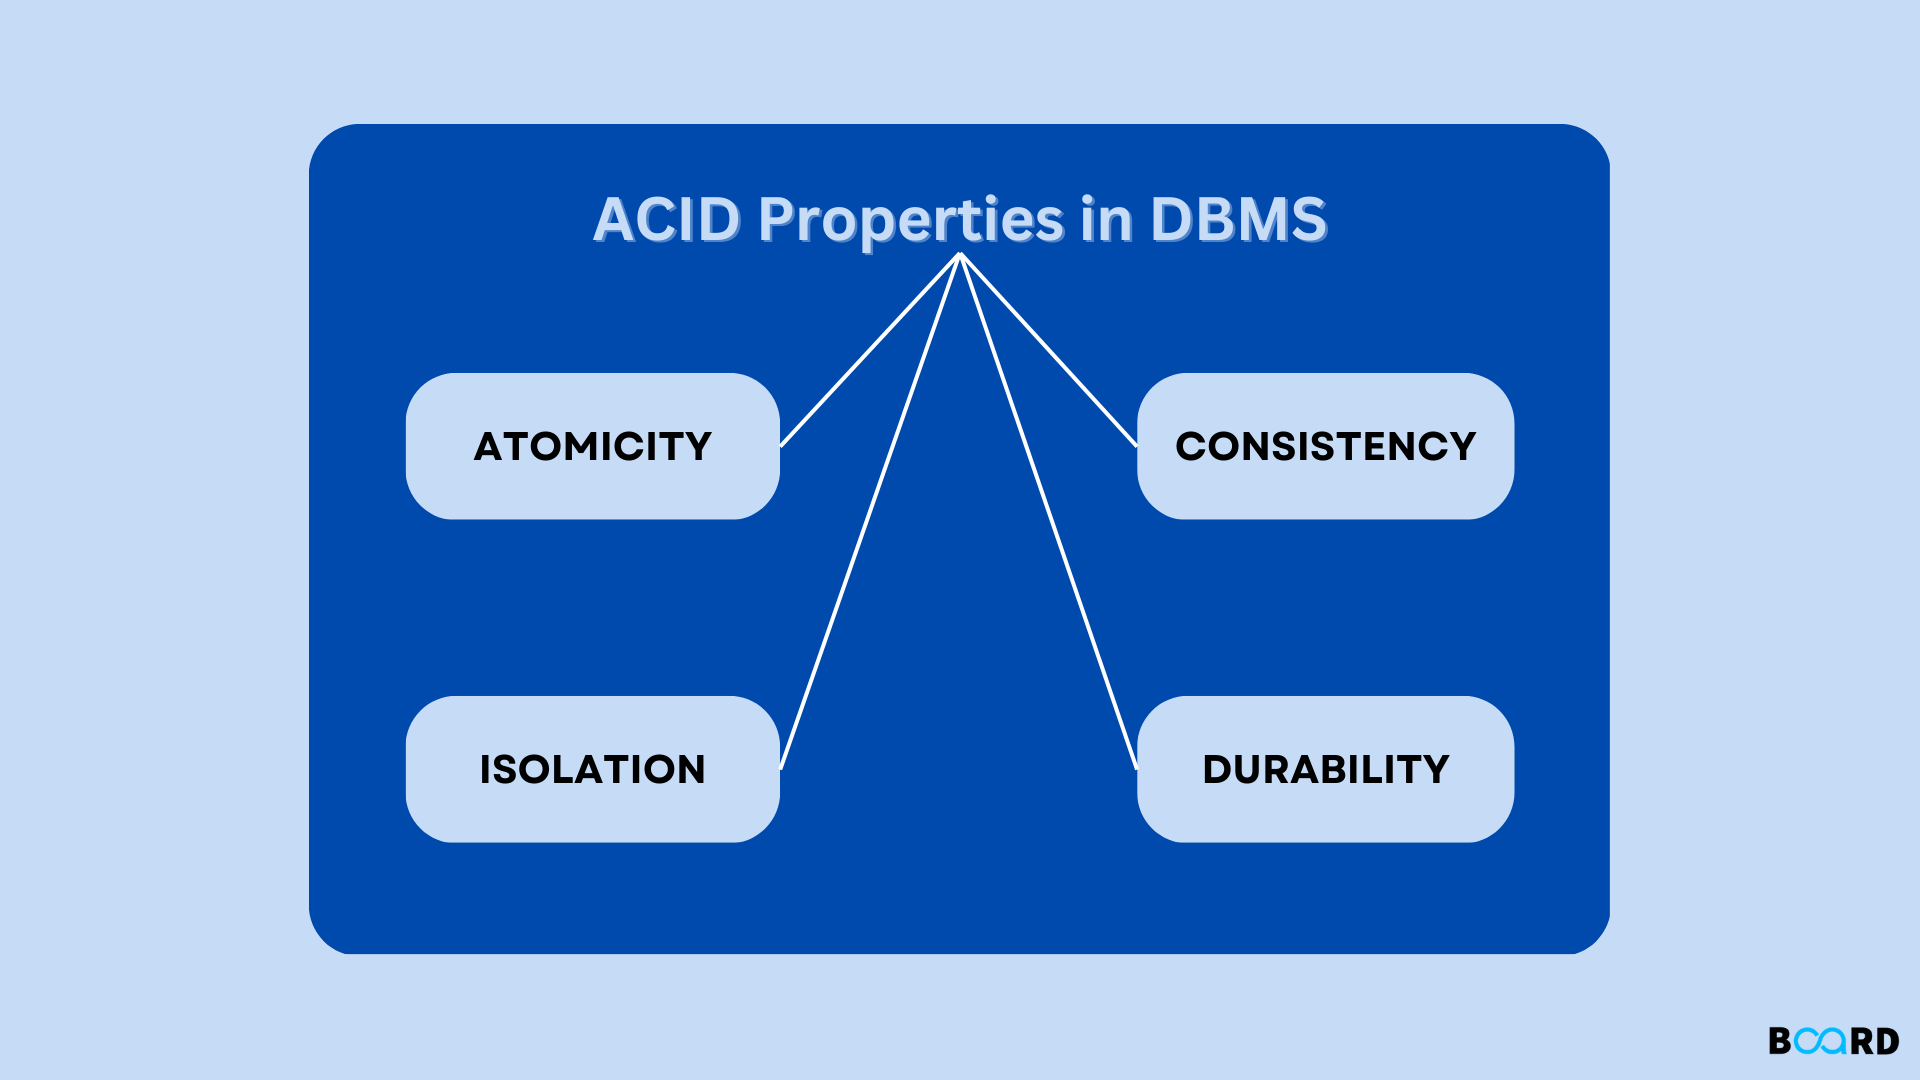 ACID Properties in DBMS with examples